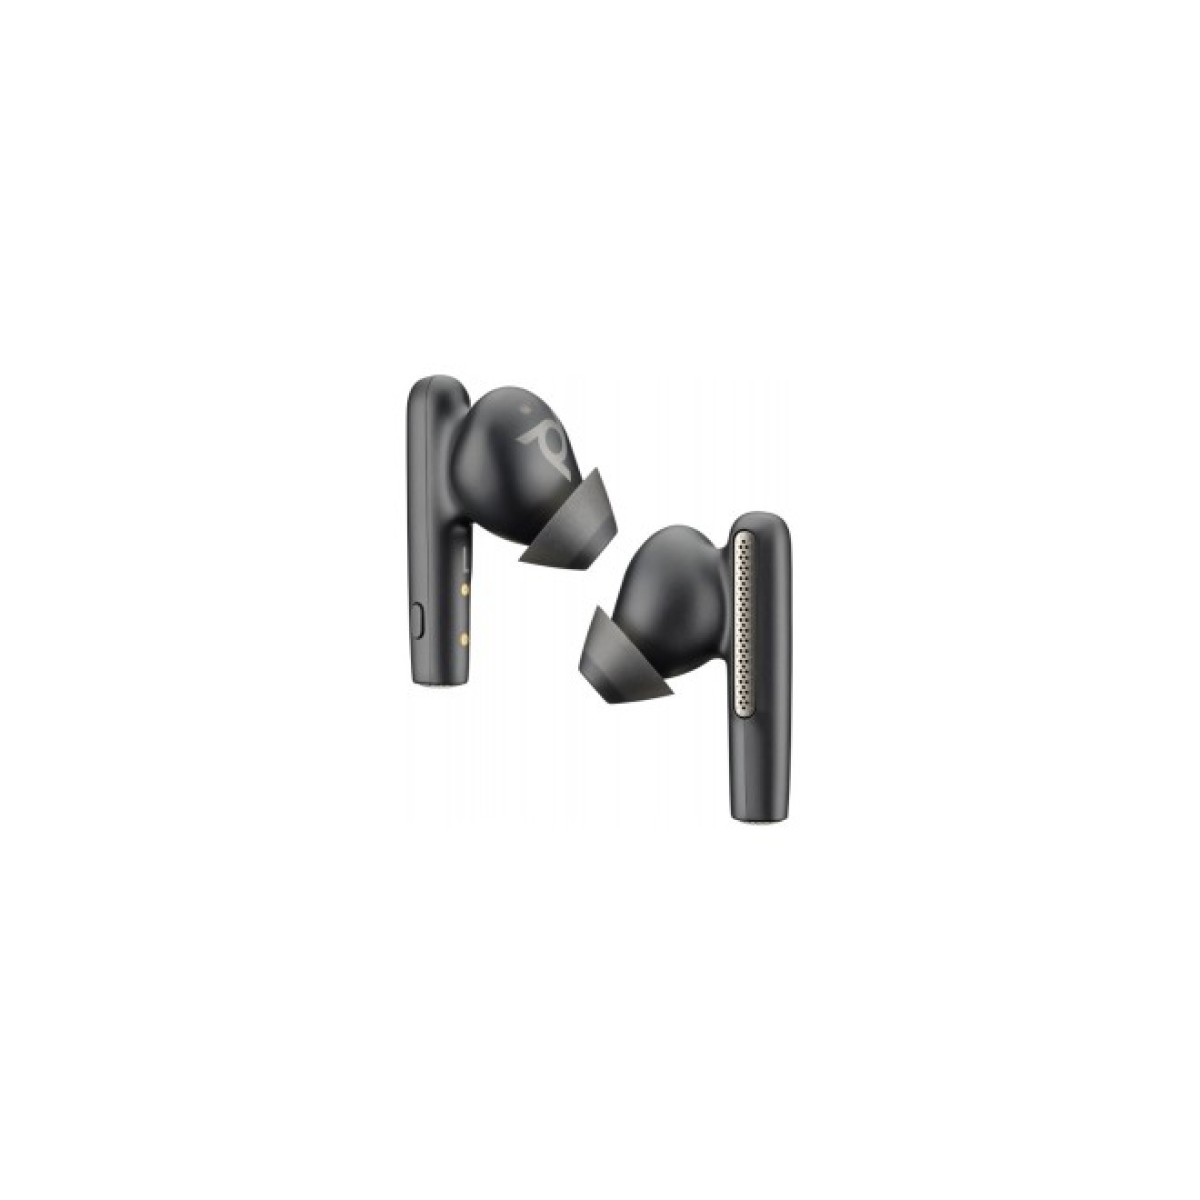 Навушники Poly Voyager Free 60+ Earbuds + BT700C + TSCHC Black (7Y8G4AA) 256_256.jpg